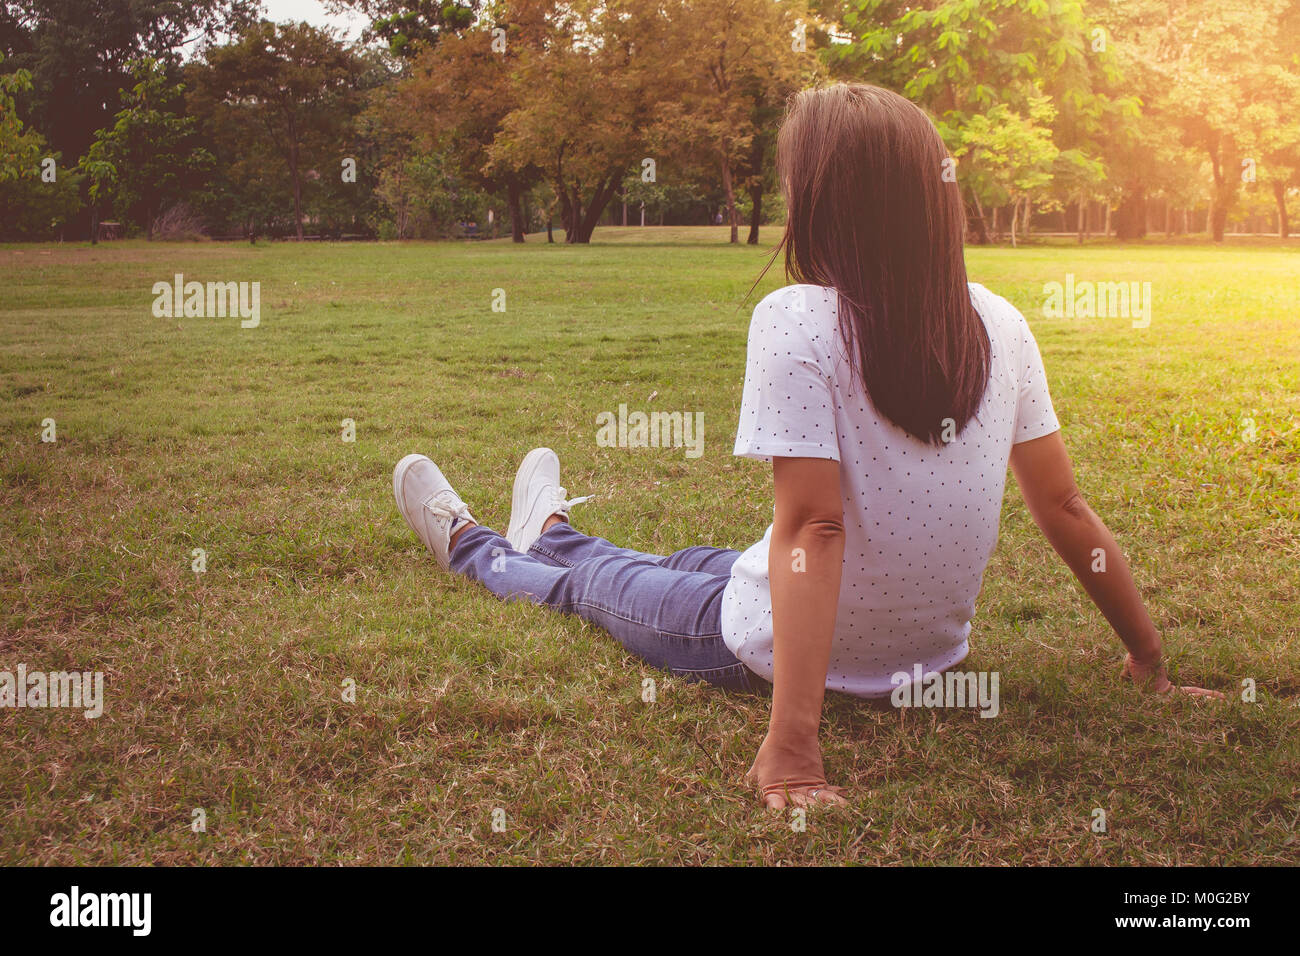 Woman relaxing and lies on green grass in the park in vintage style. Stock Photo